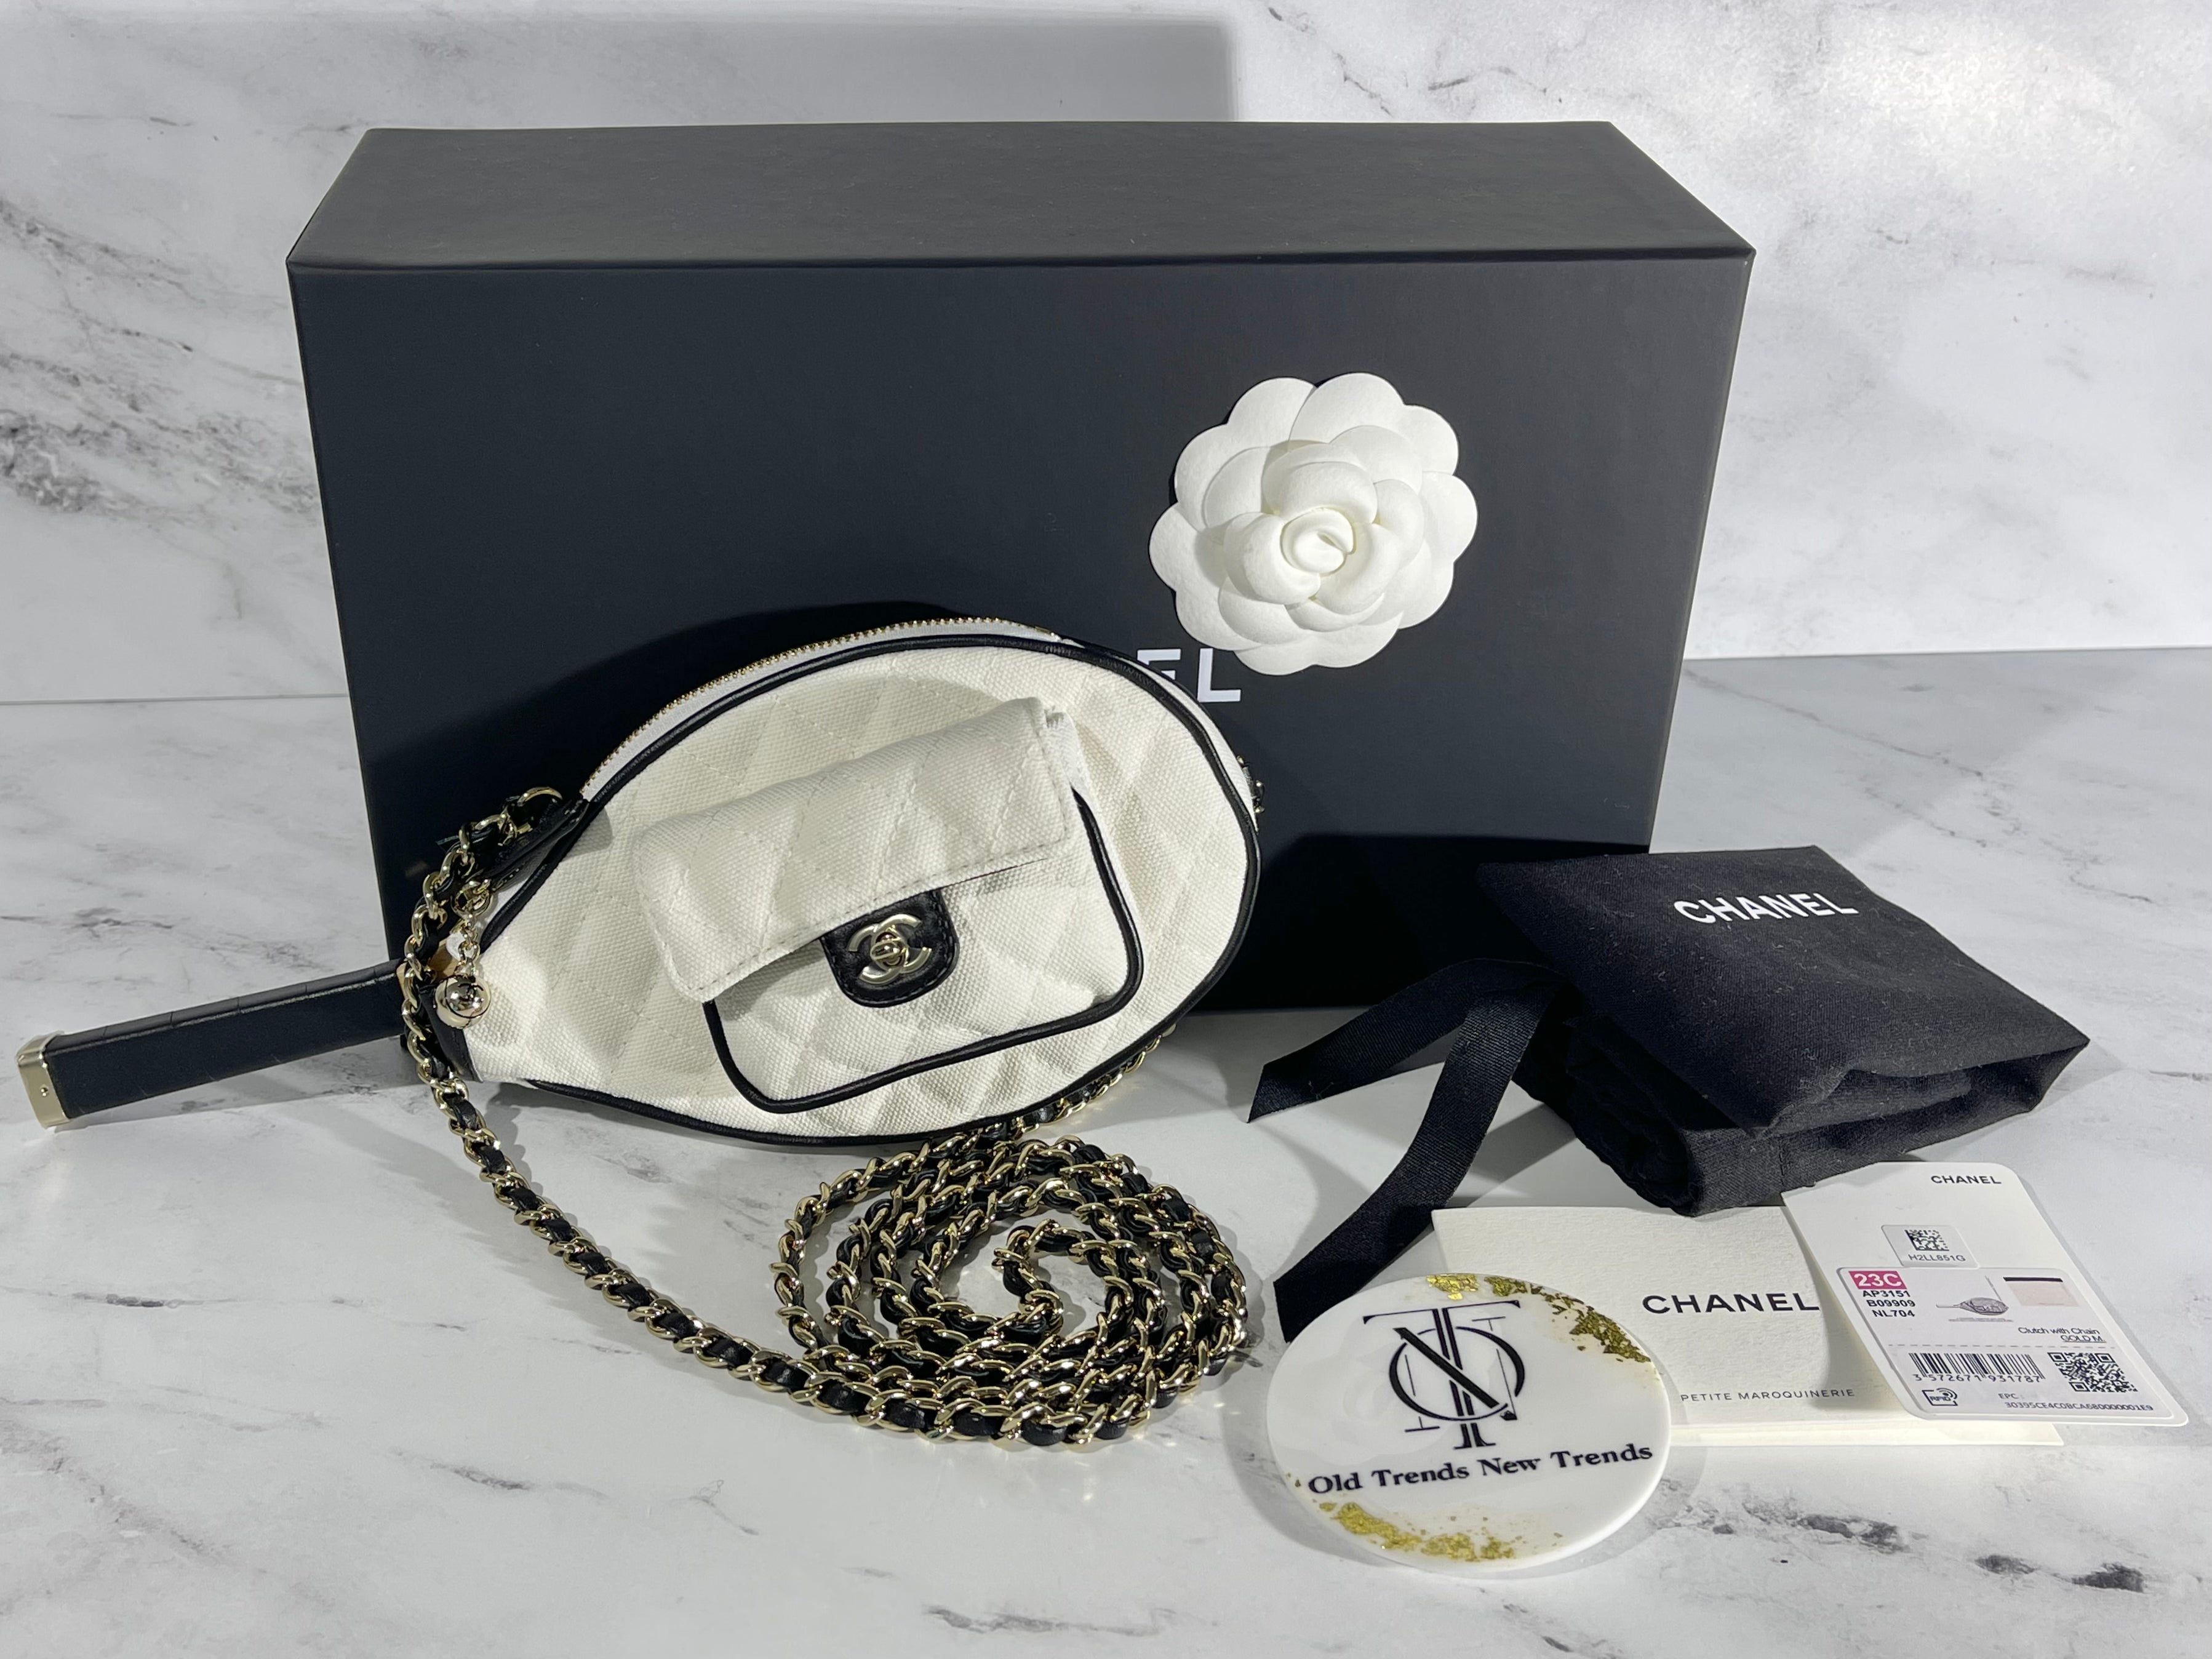 Chanel VIP Gift Pouch In Gorgeous Black